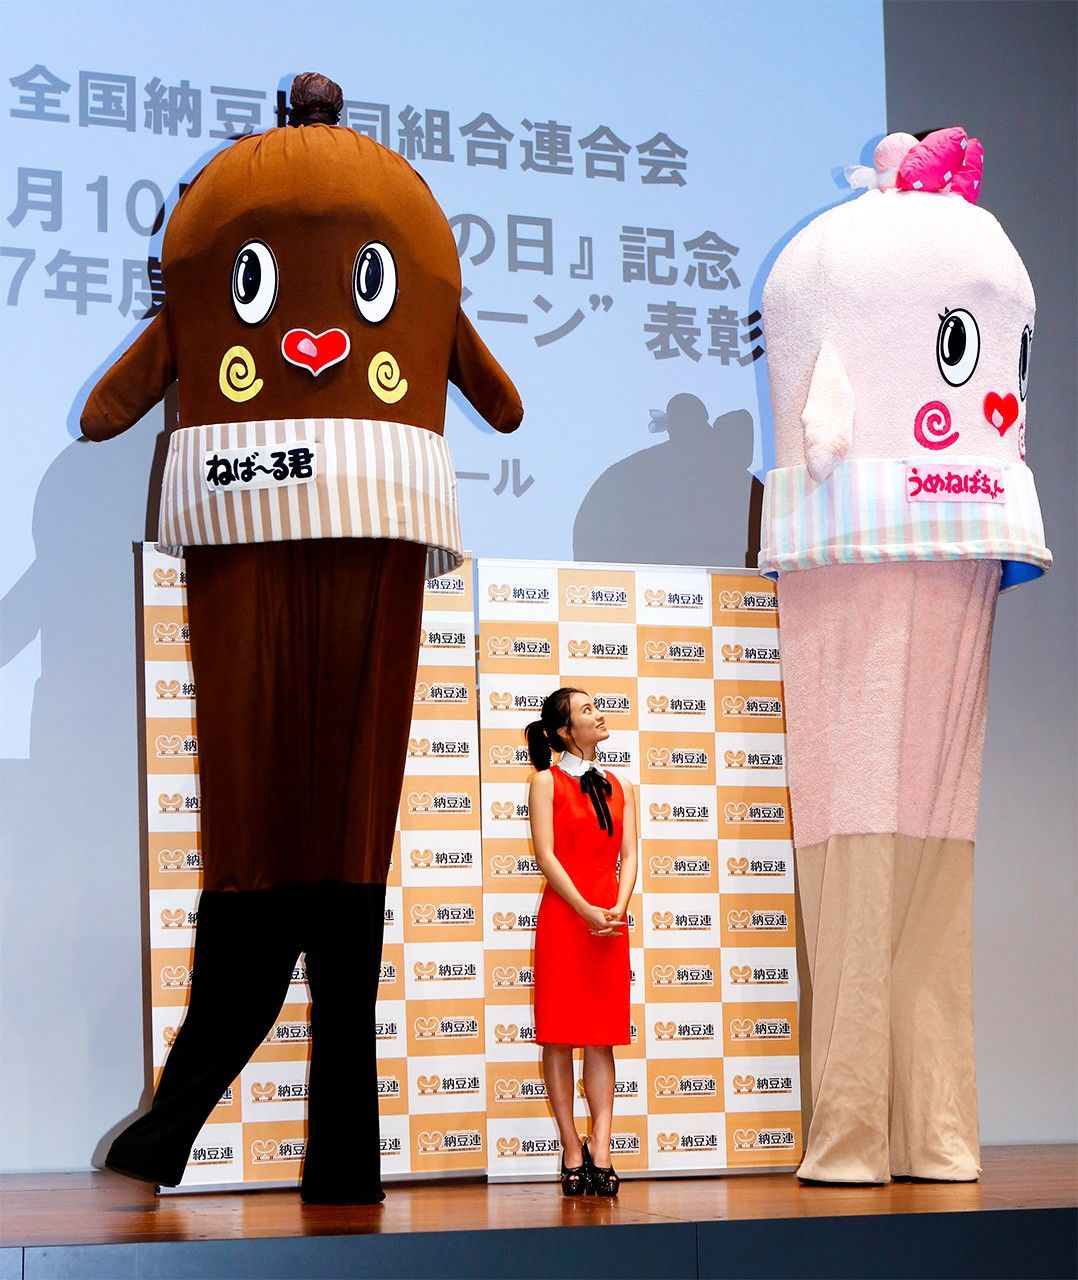 Nebāru-kun, the prefecture’s official mascot whose name evokes the stickiness of Ibaraki’s nattō, appears (at left) with his friend Umeneba-chan, who also references the plums grown in the prefecture. (© Jiji)